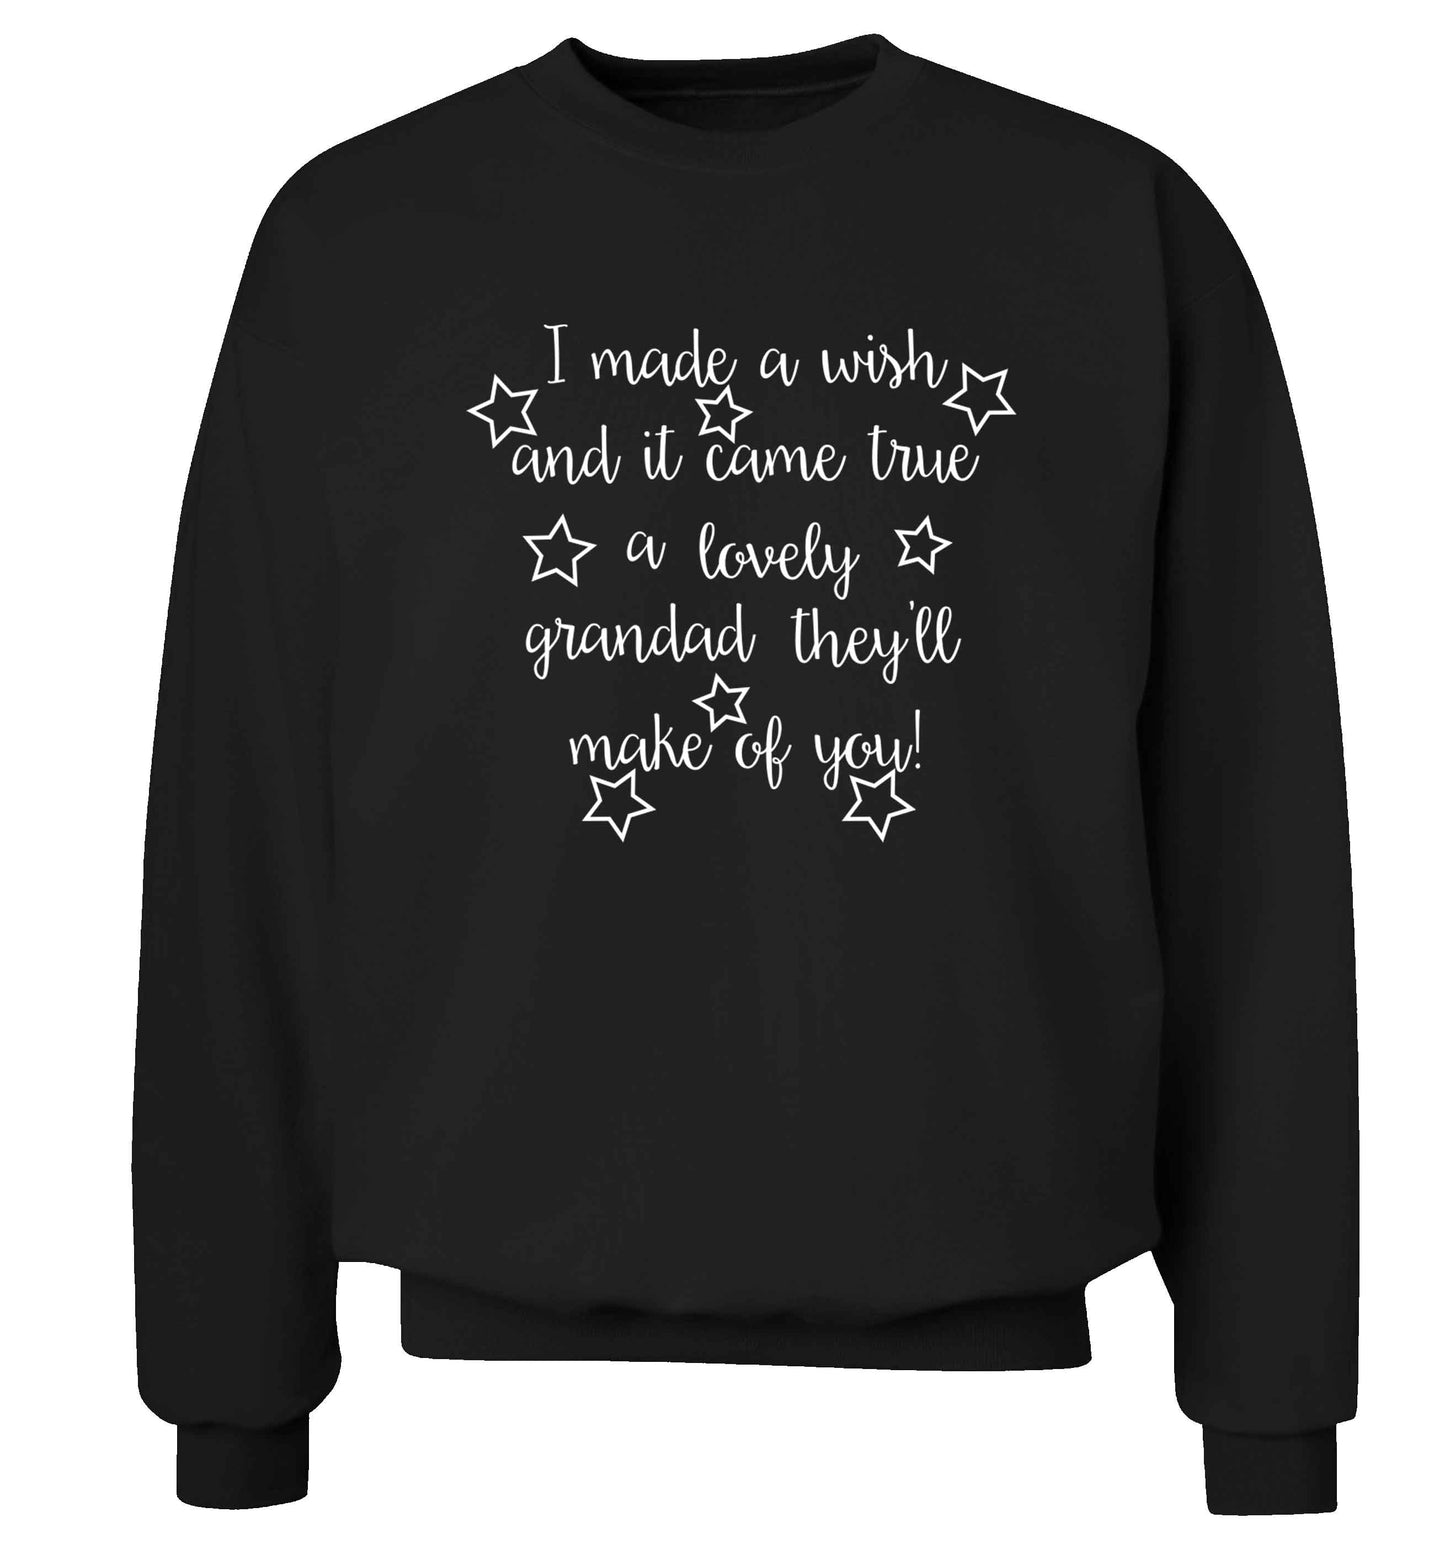 I made a wish and it came true a lovely grandad they'll make of you! Adult's unisex black Sweater 2XL